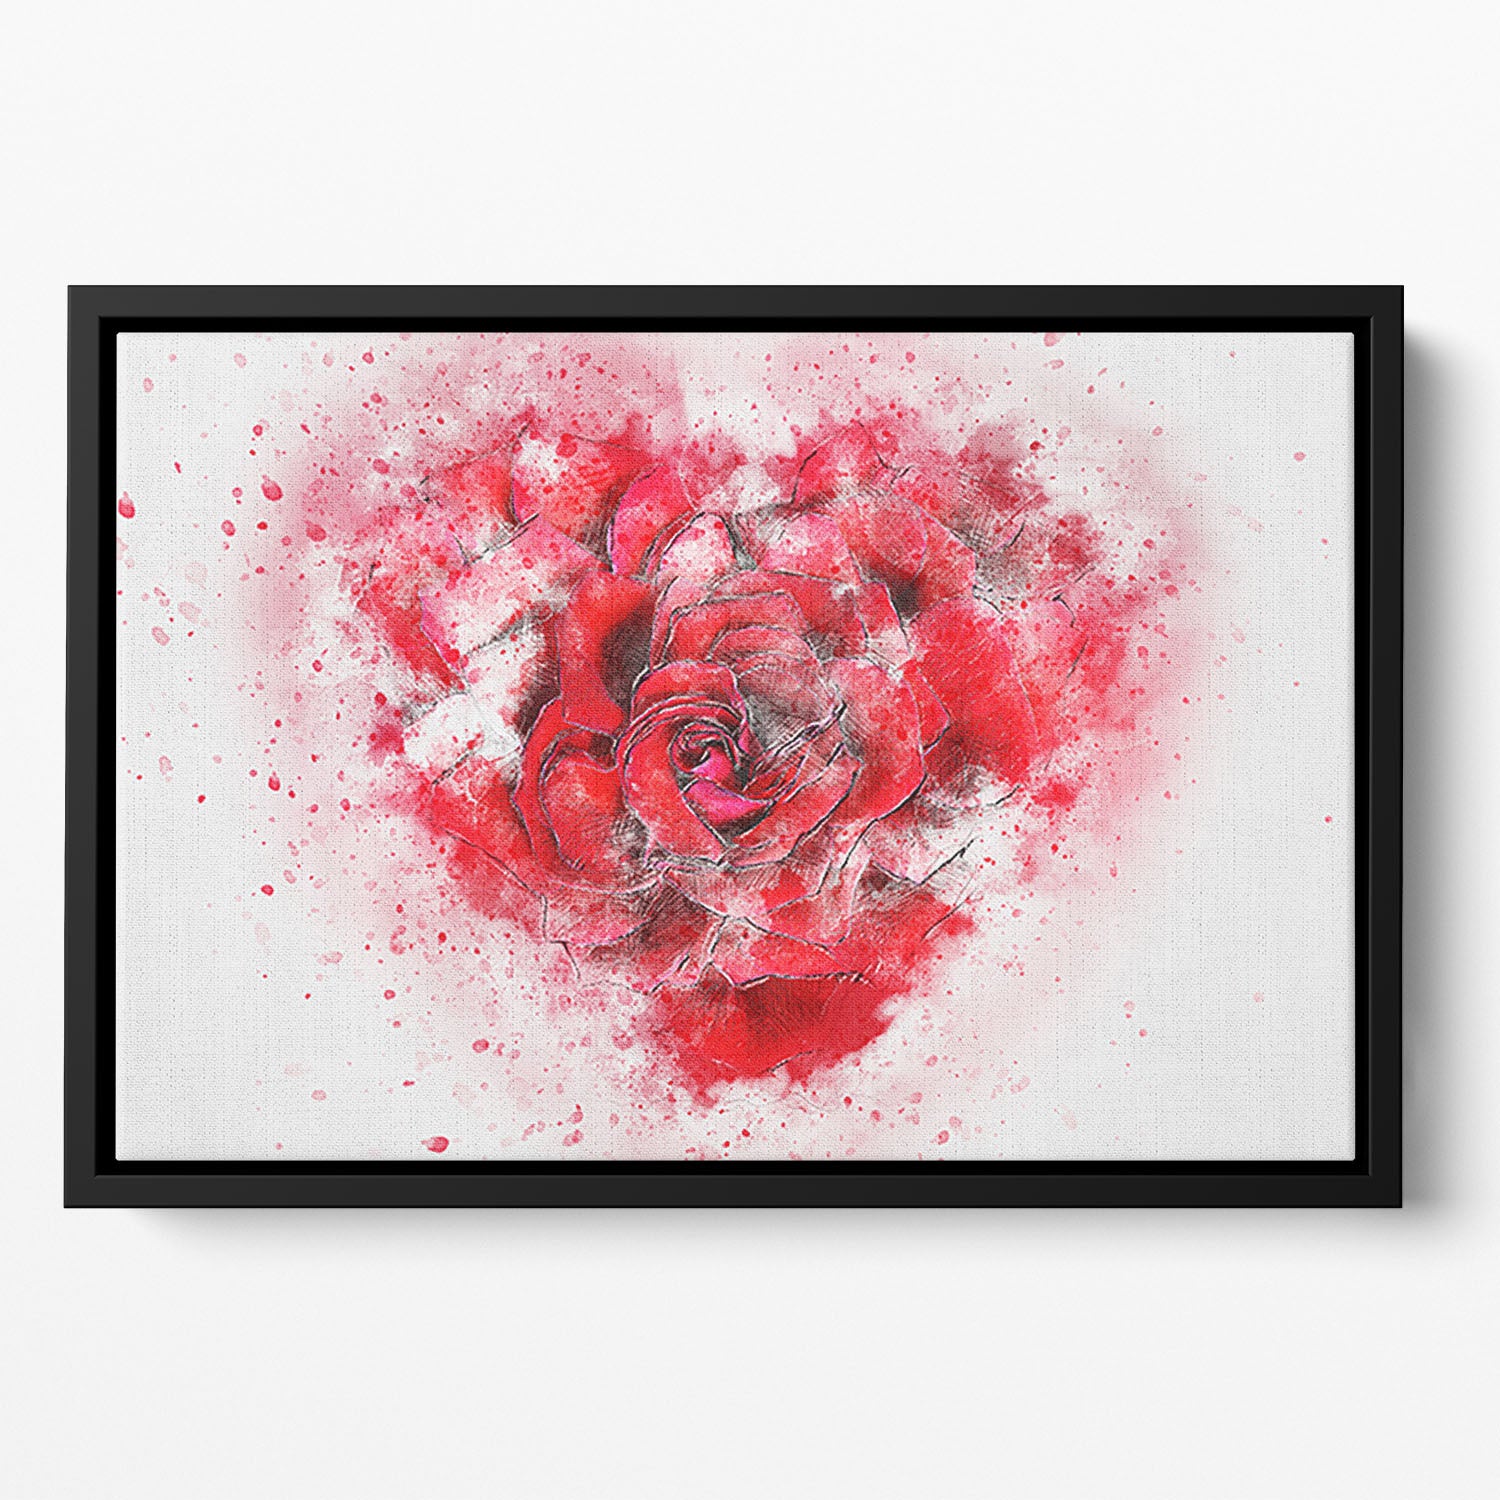 Rose Heart Painting Floating Framed Canvas